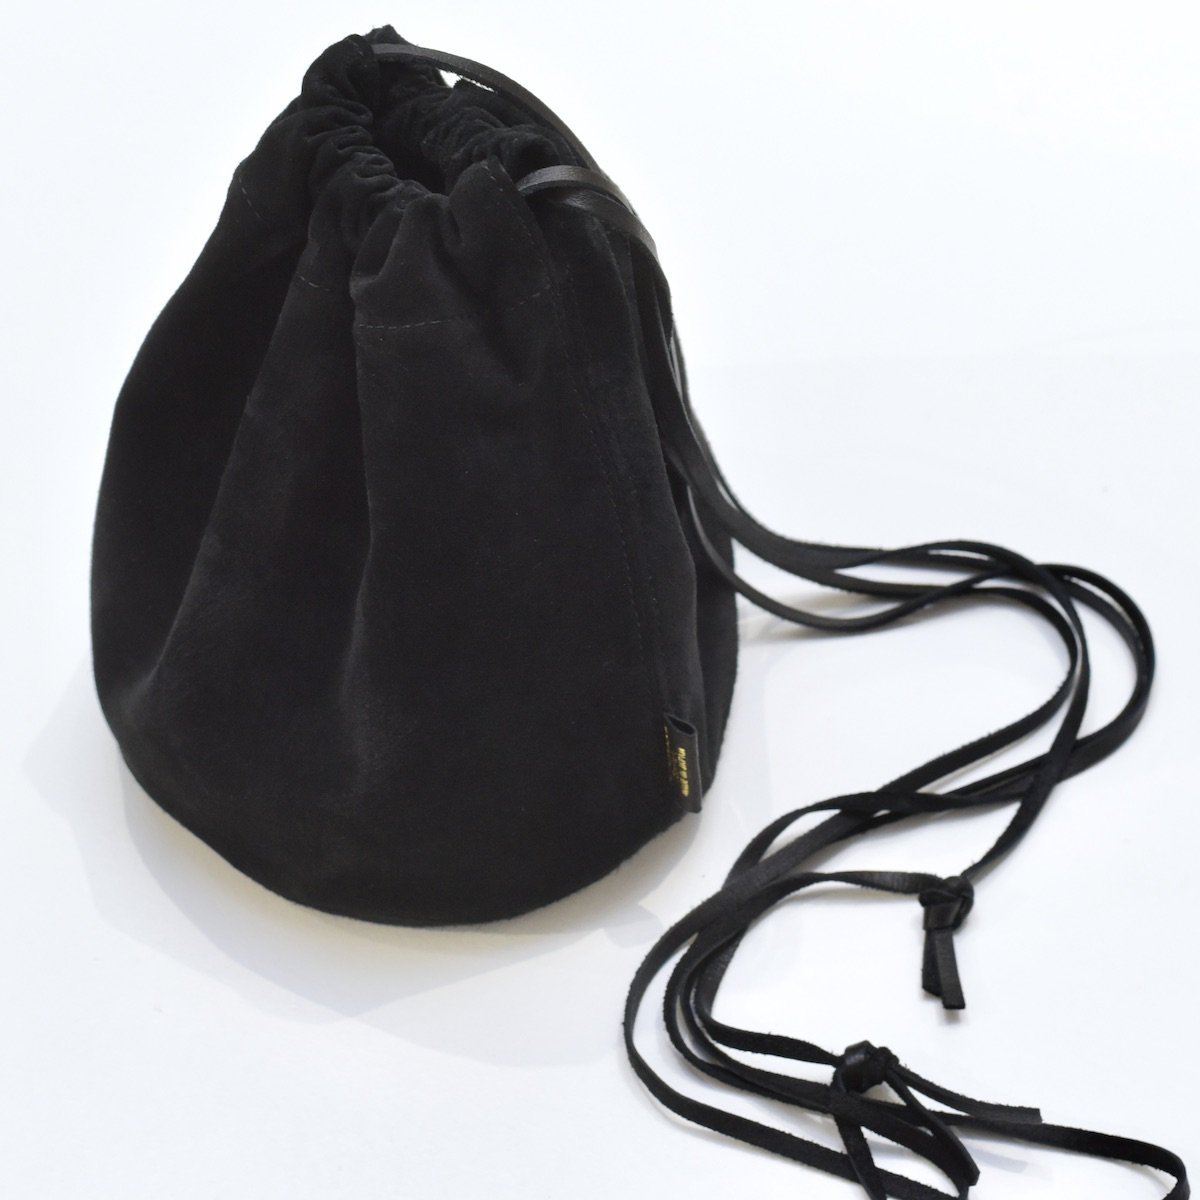 abugaBrick Personal Effects Bag Suede ブリック